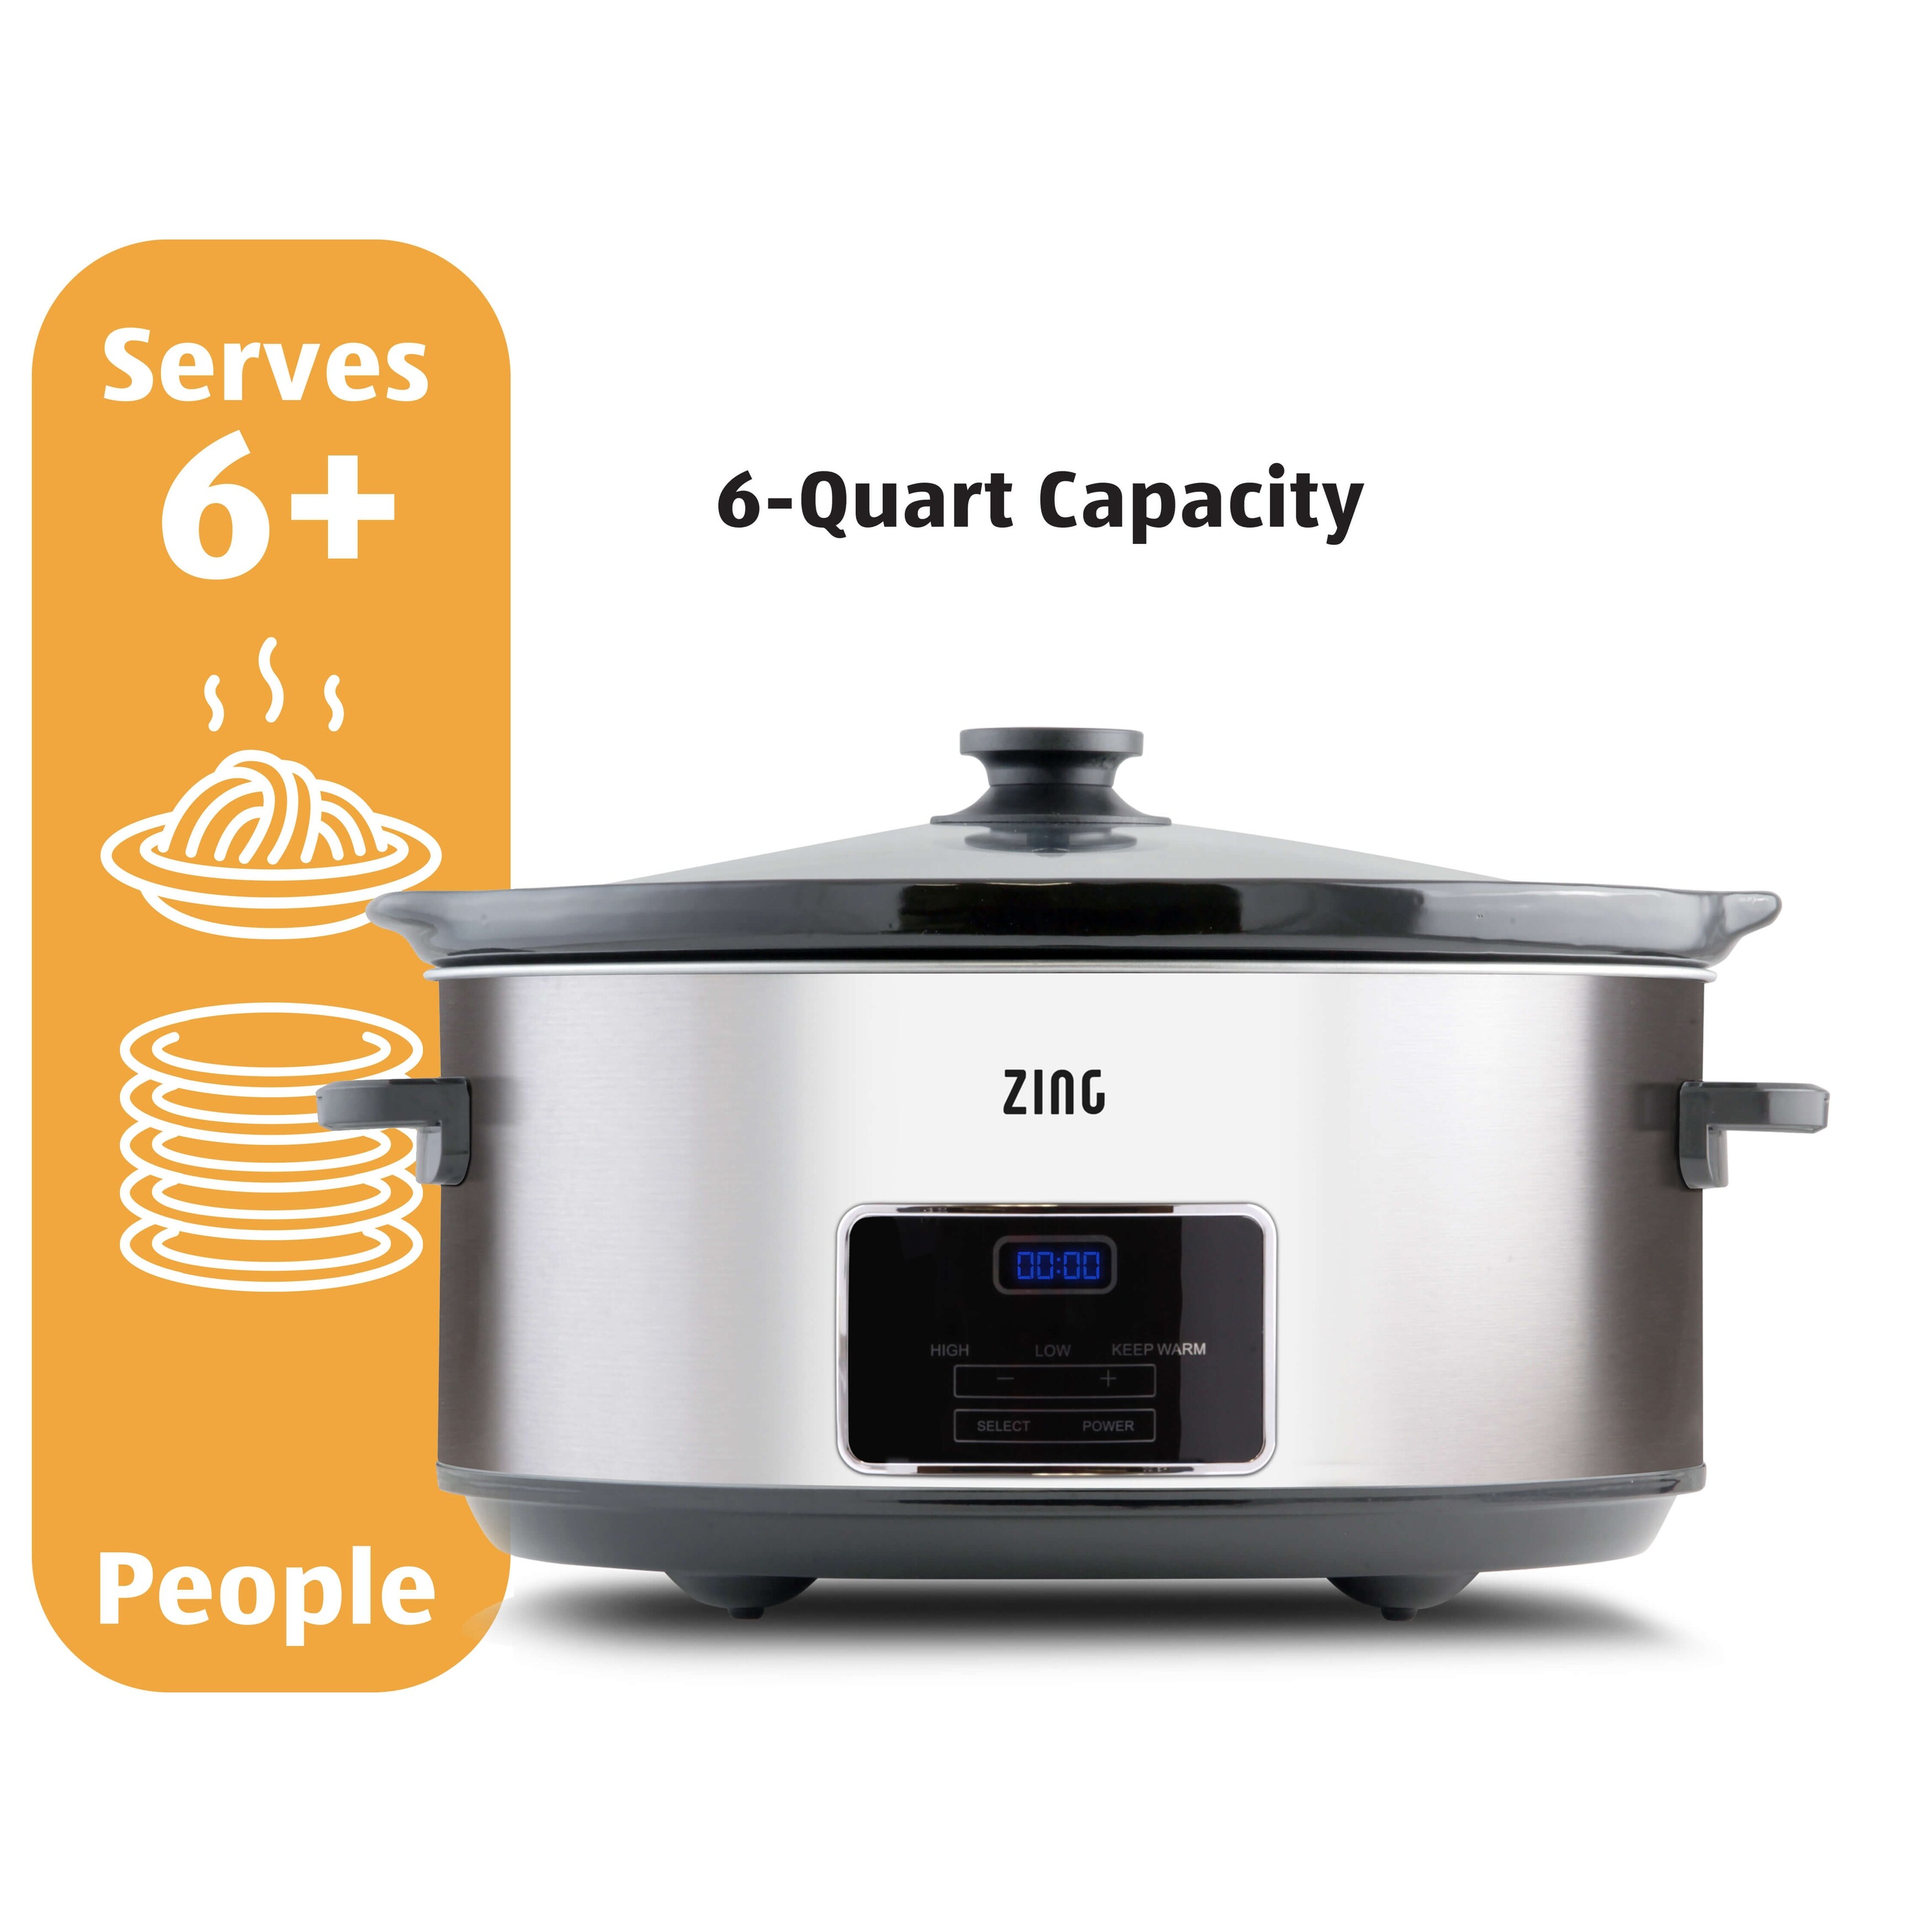 https://ak1.ostkcdn.com/images/products/is/images/direct/a9de08b5ba9dbeef979afd2e1c8d23d99b87df9f/Zing-6-Quart-Digital-Programmable-Slow-Cooker.jpg